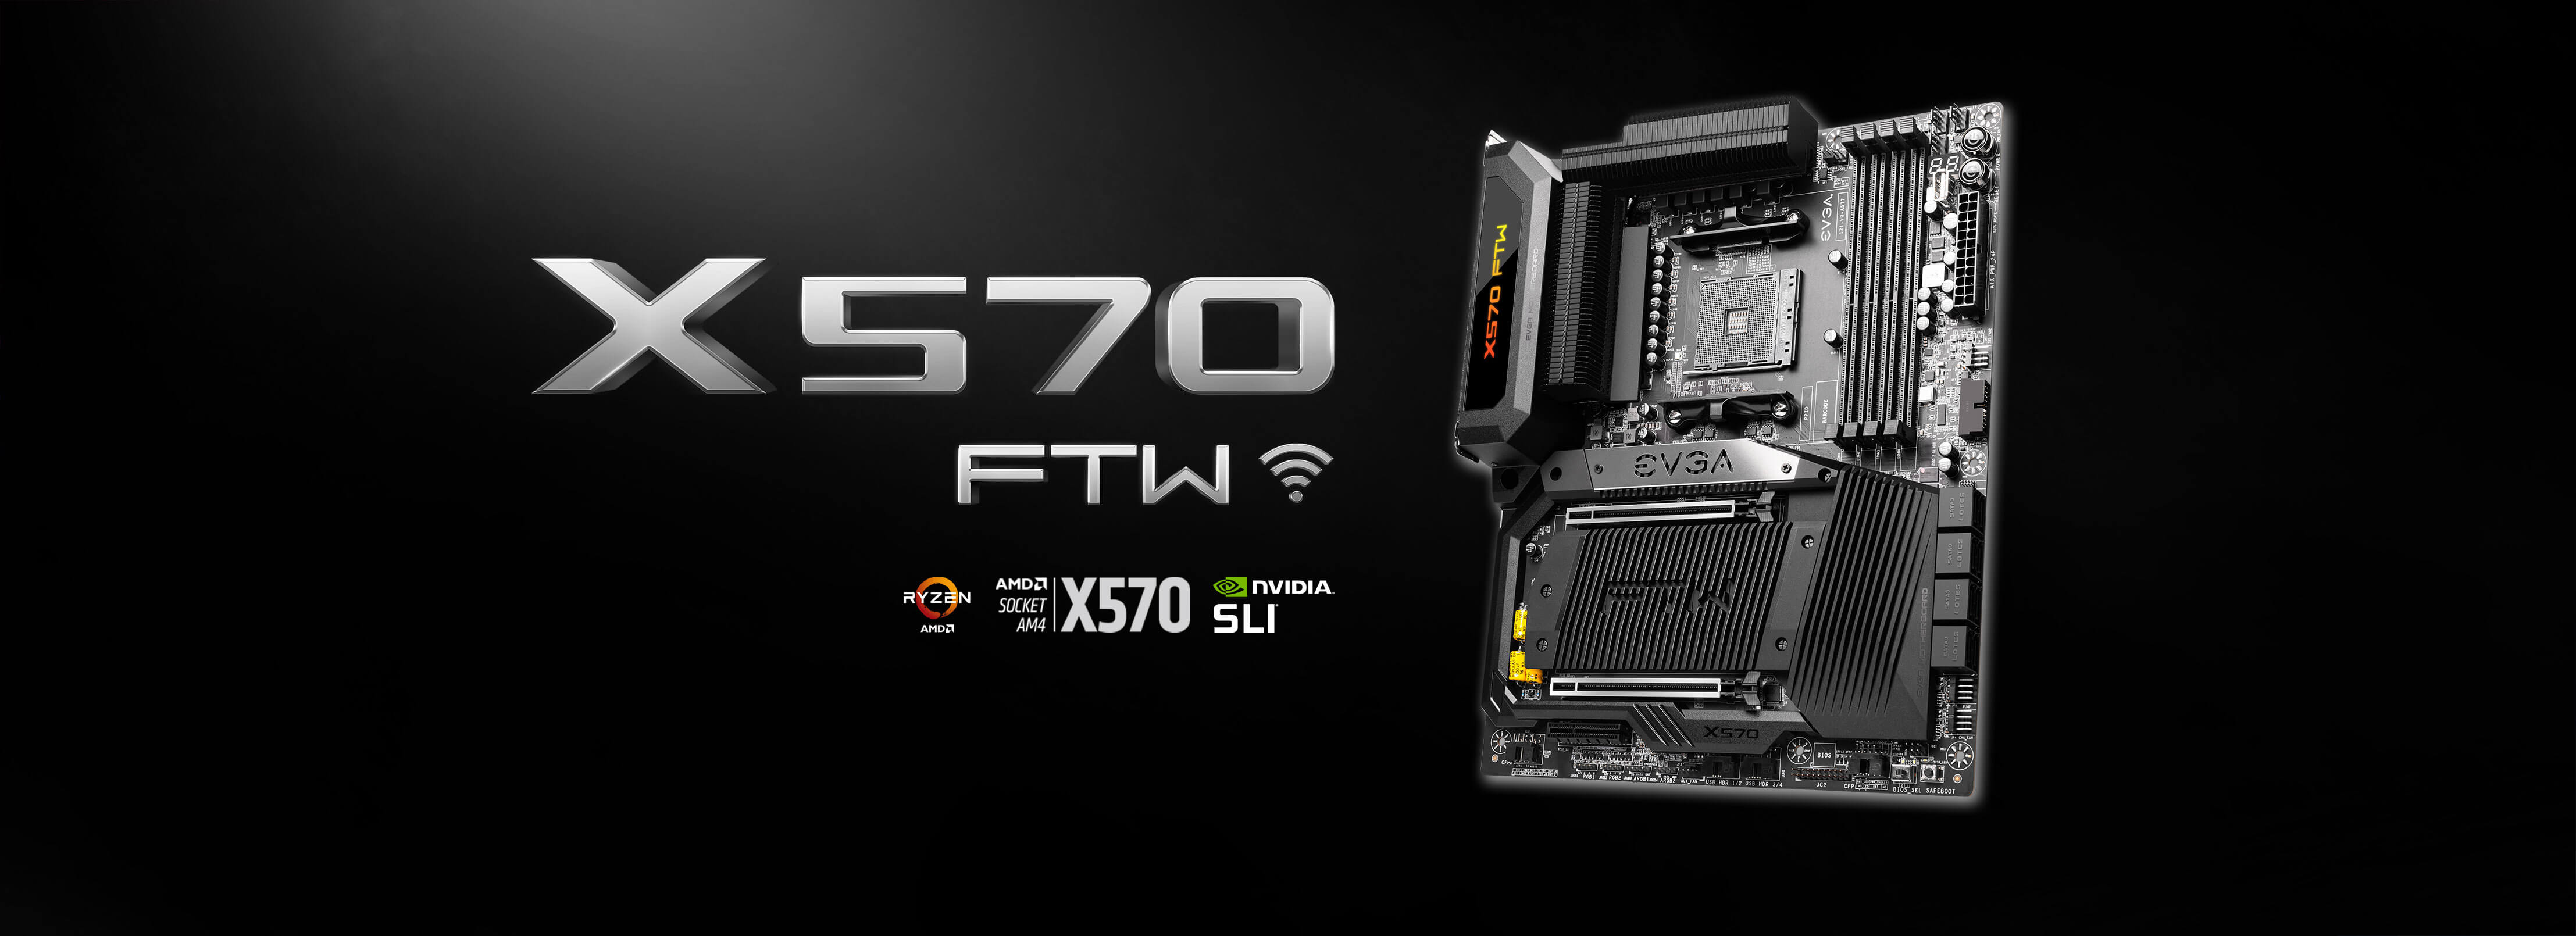 EVGA X570 FTW WIFI Motherboards